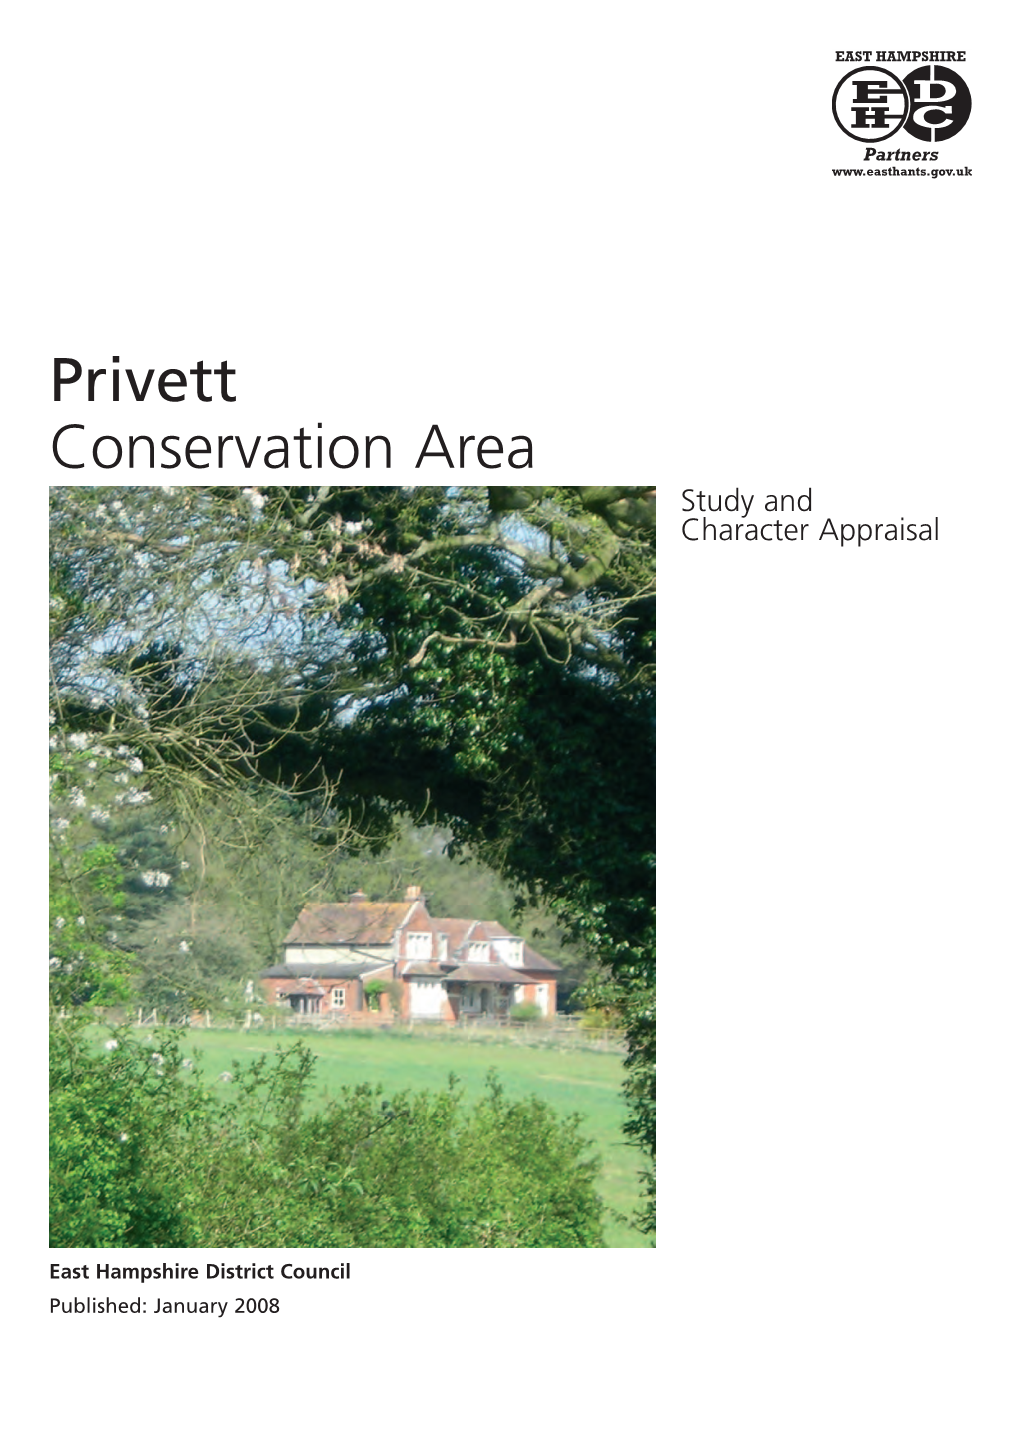 Privett Conservation Area Study and Character Appraisal